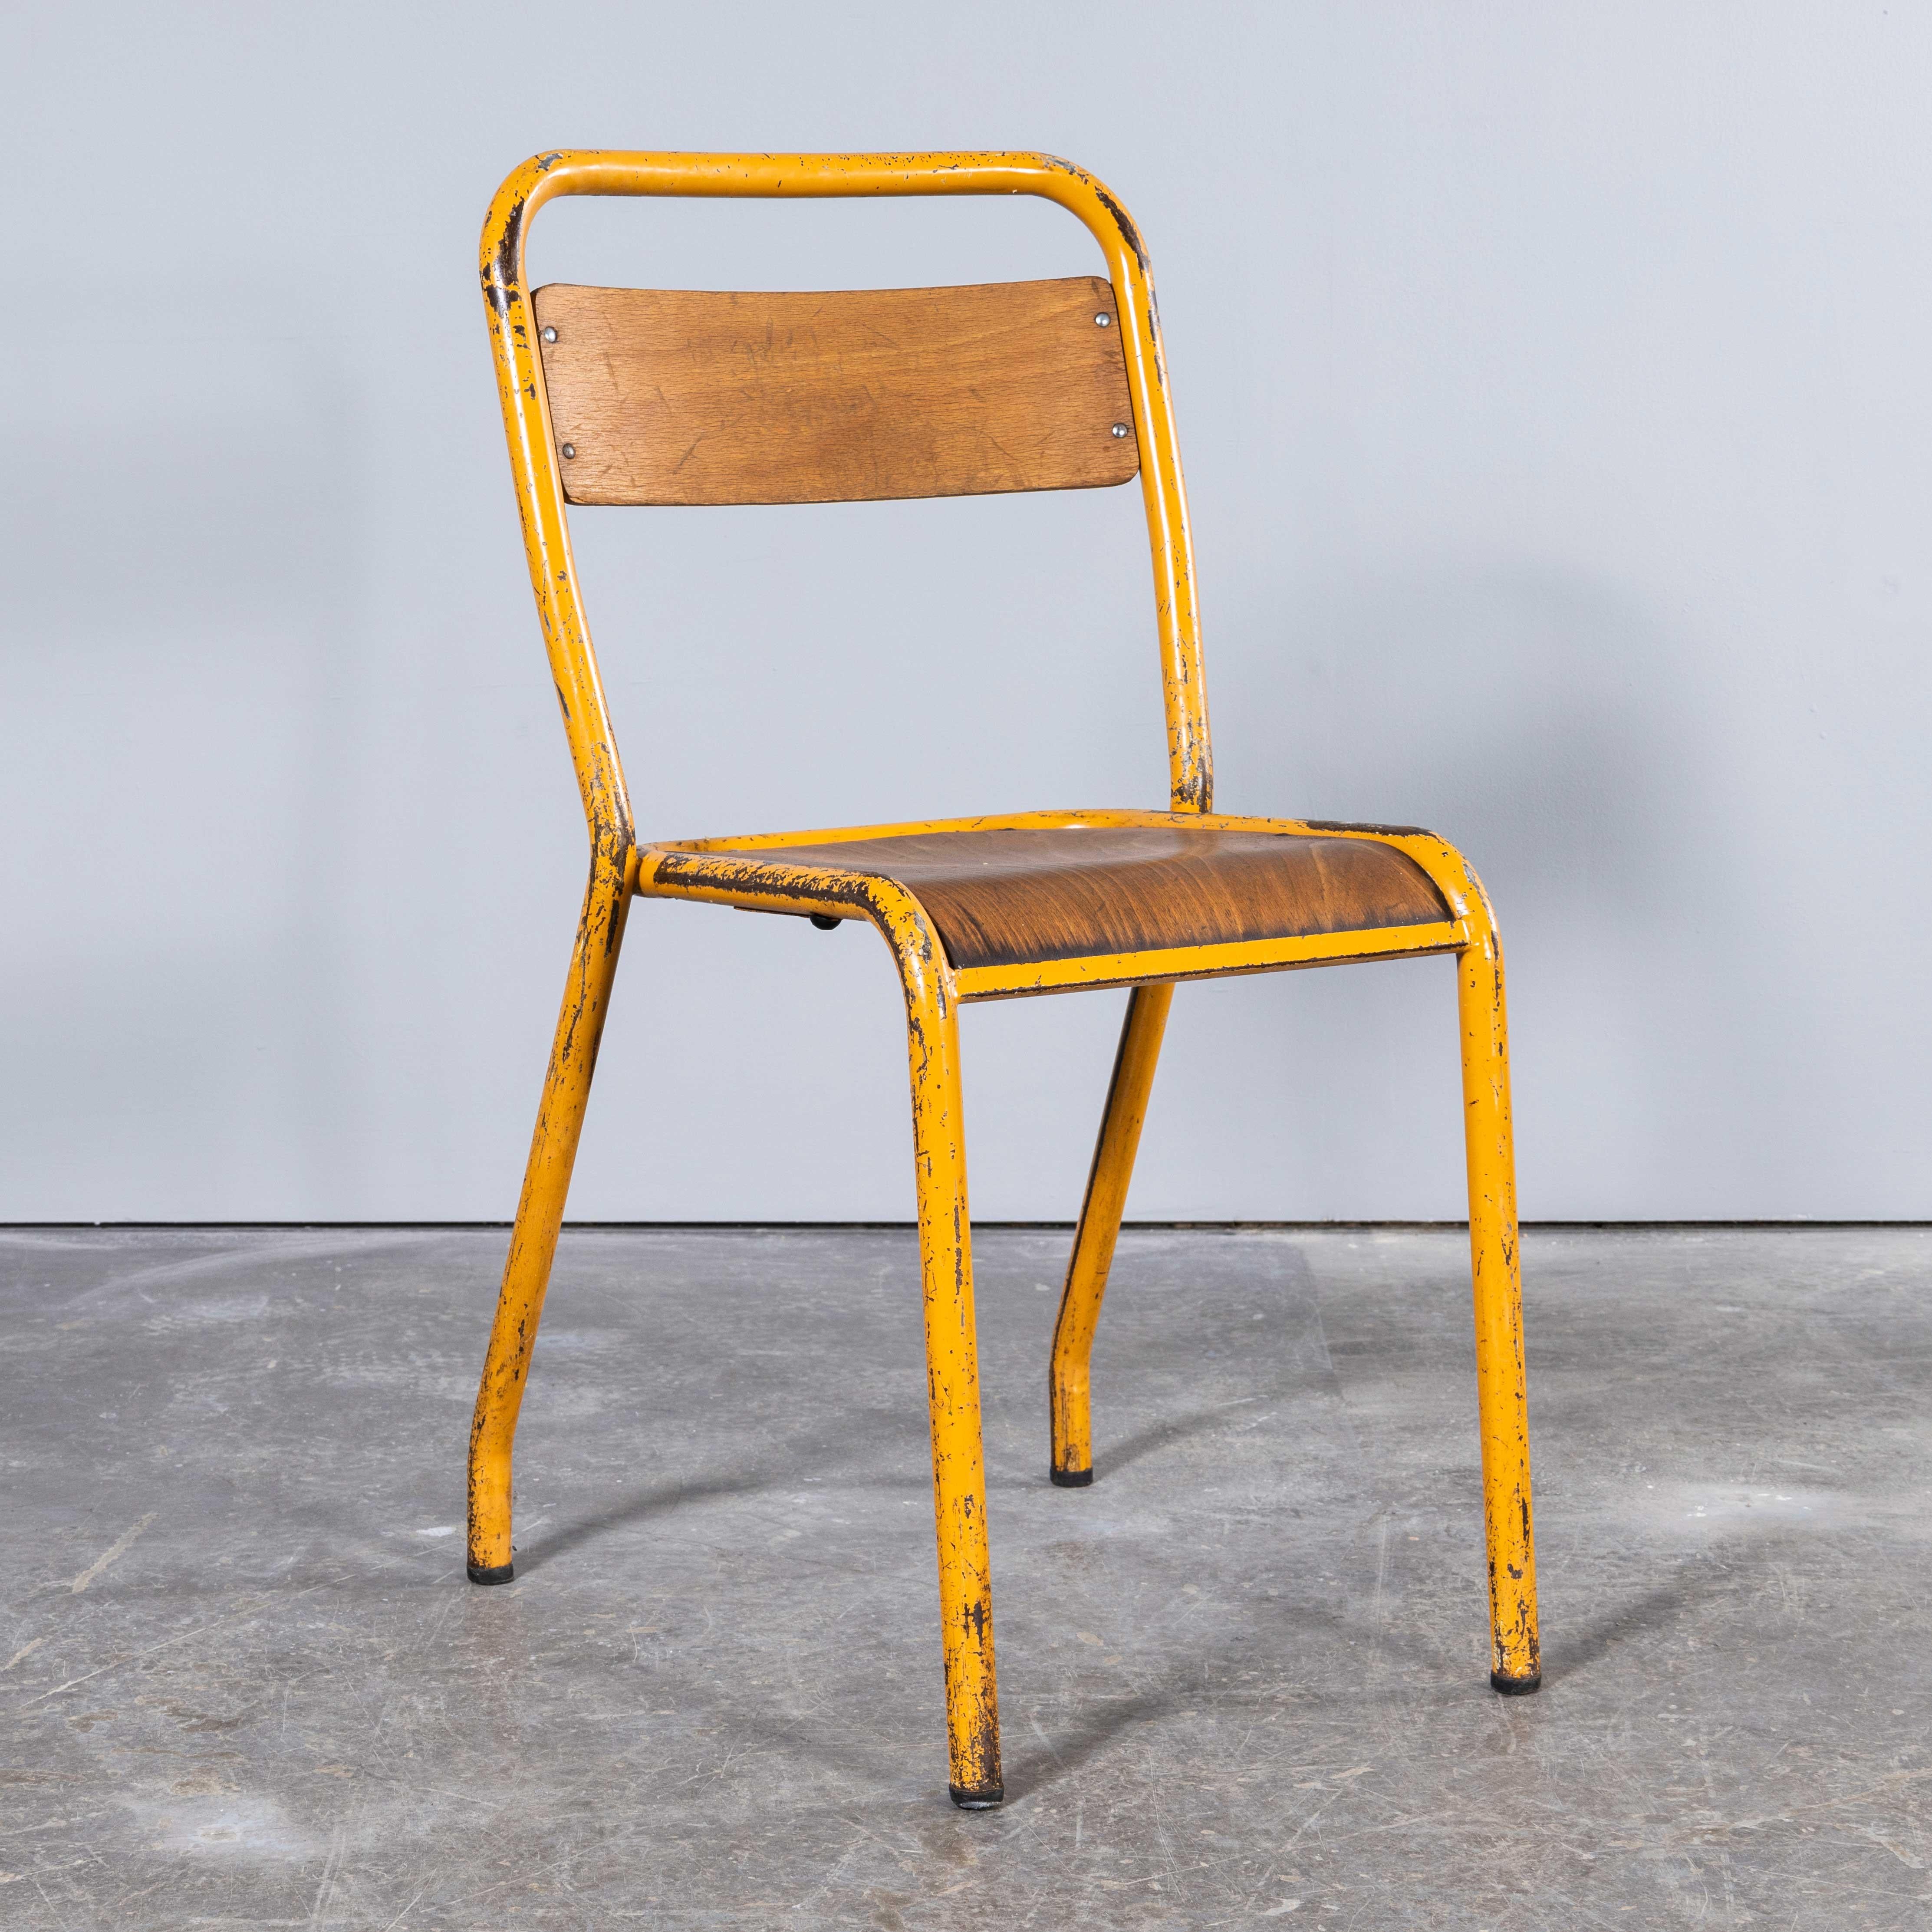 1950's Original Yellow French Tolix Wood Seat Metal Bistro Dining Chair - Large  For Sale 10